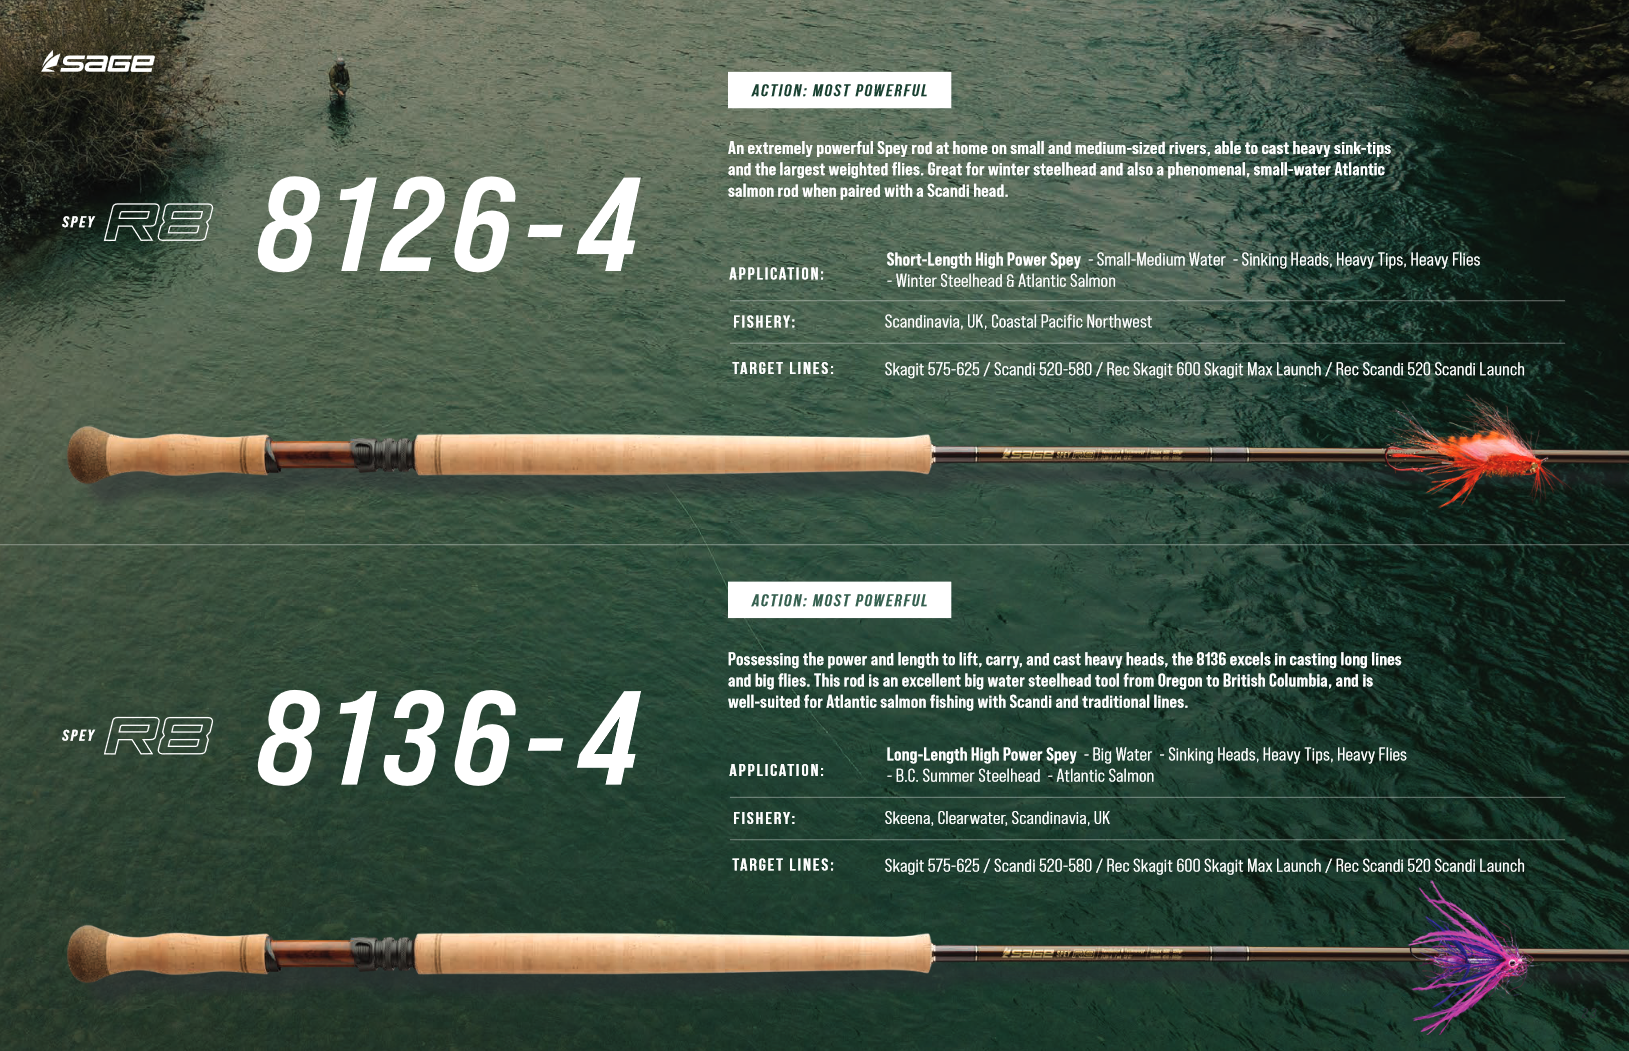 Sage SPEY R8 8126-4 8wt 12'6" The Most Powerful Spey Rods - NEW!